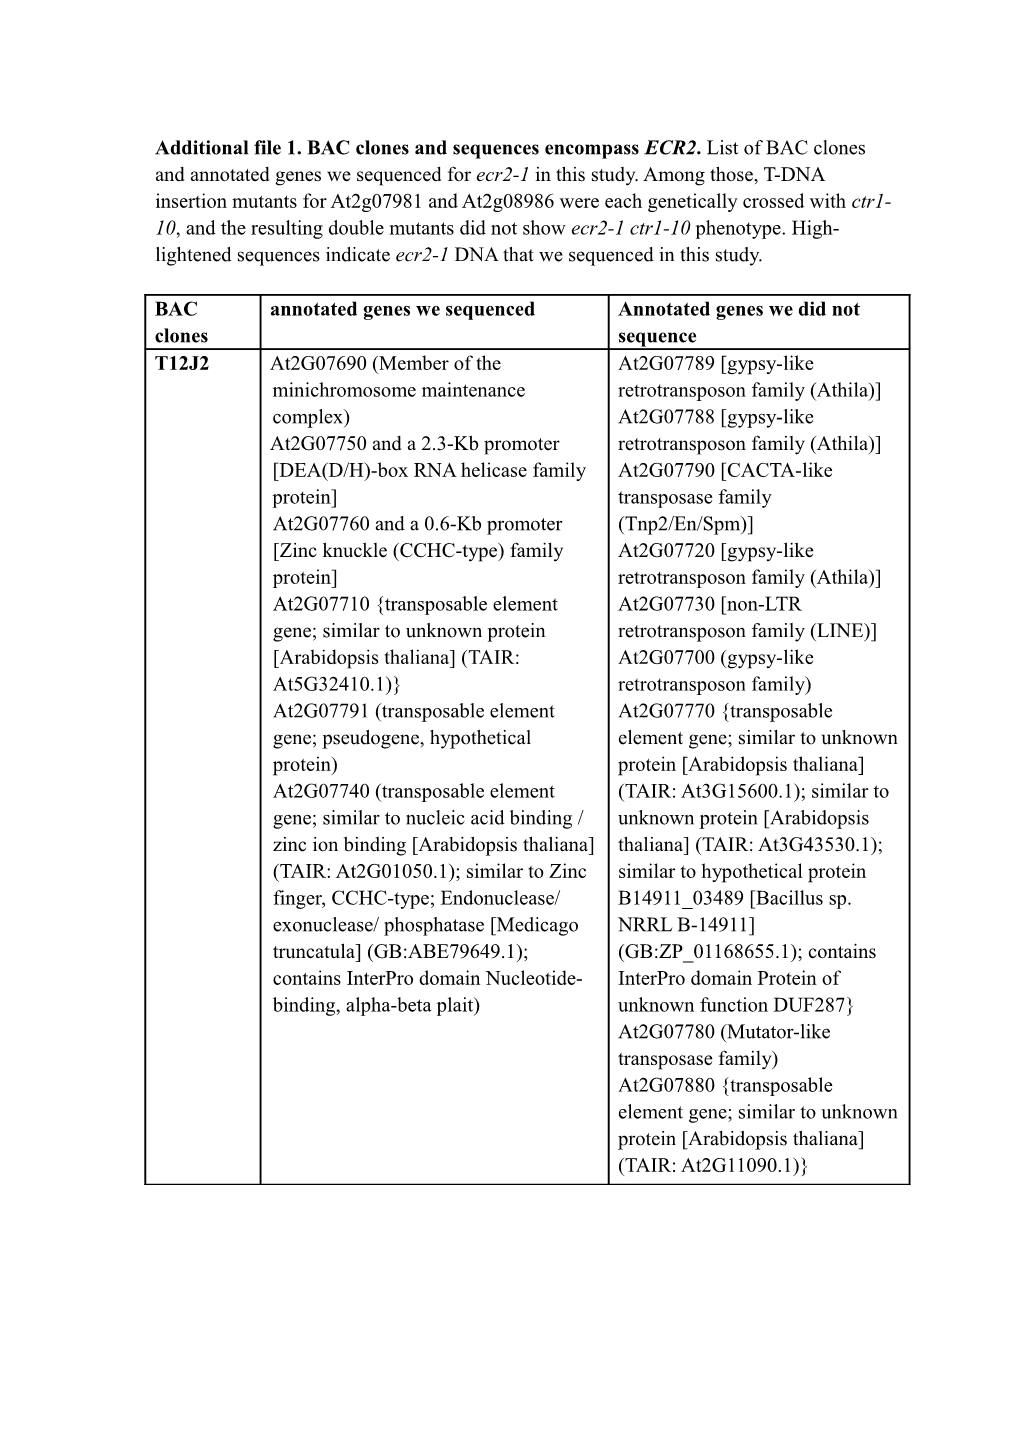 Additional File 1. BAC Clones and Sequences Encompass ECR2. List of BAC Clones and Annotated